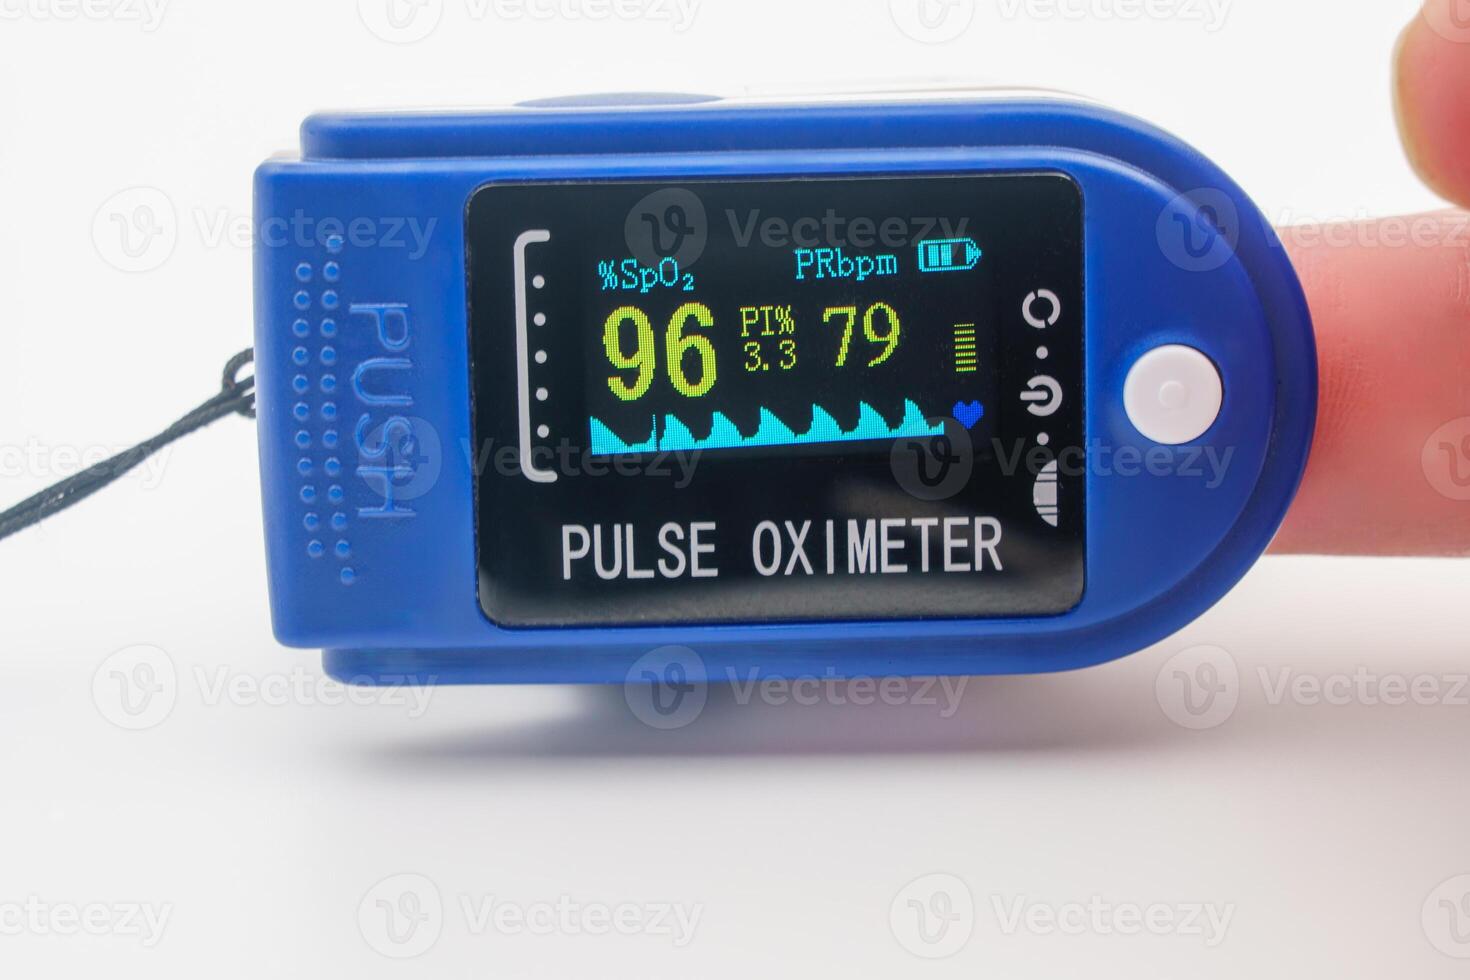 Medical pulse oximeter with an LCD. Assessment of blood oxygen saturation SpO2. COVID-19 Medical monitoring device pandemic. Heart and pulse rate, crucial in patient health monitoring, emergencies. photo